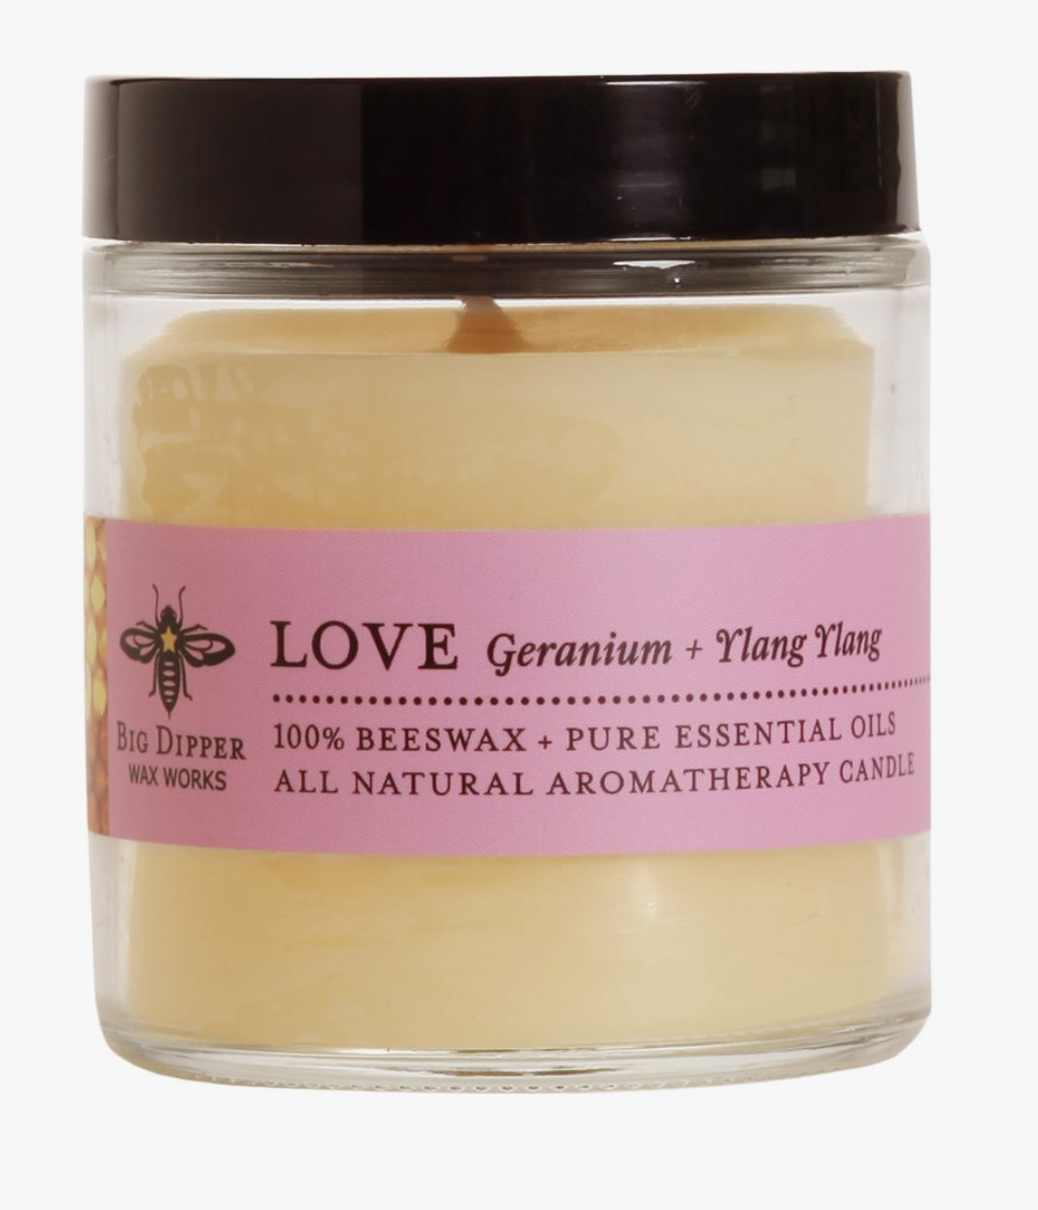 Big Dipper Wax Works Apothecary Candle Love